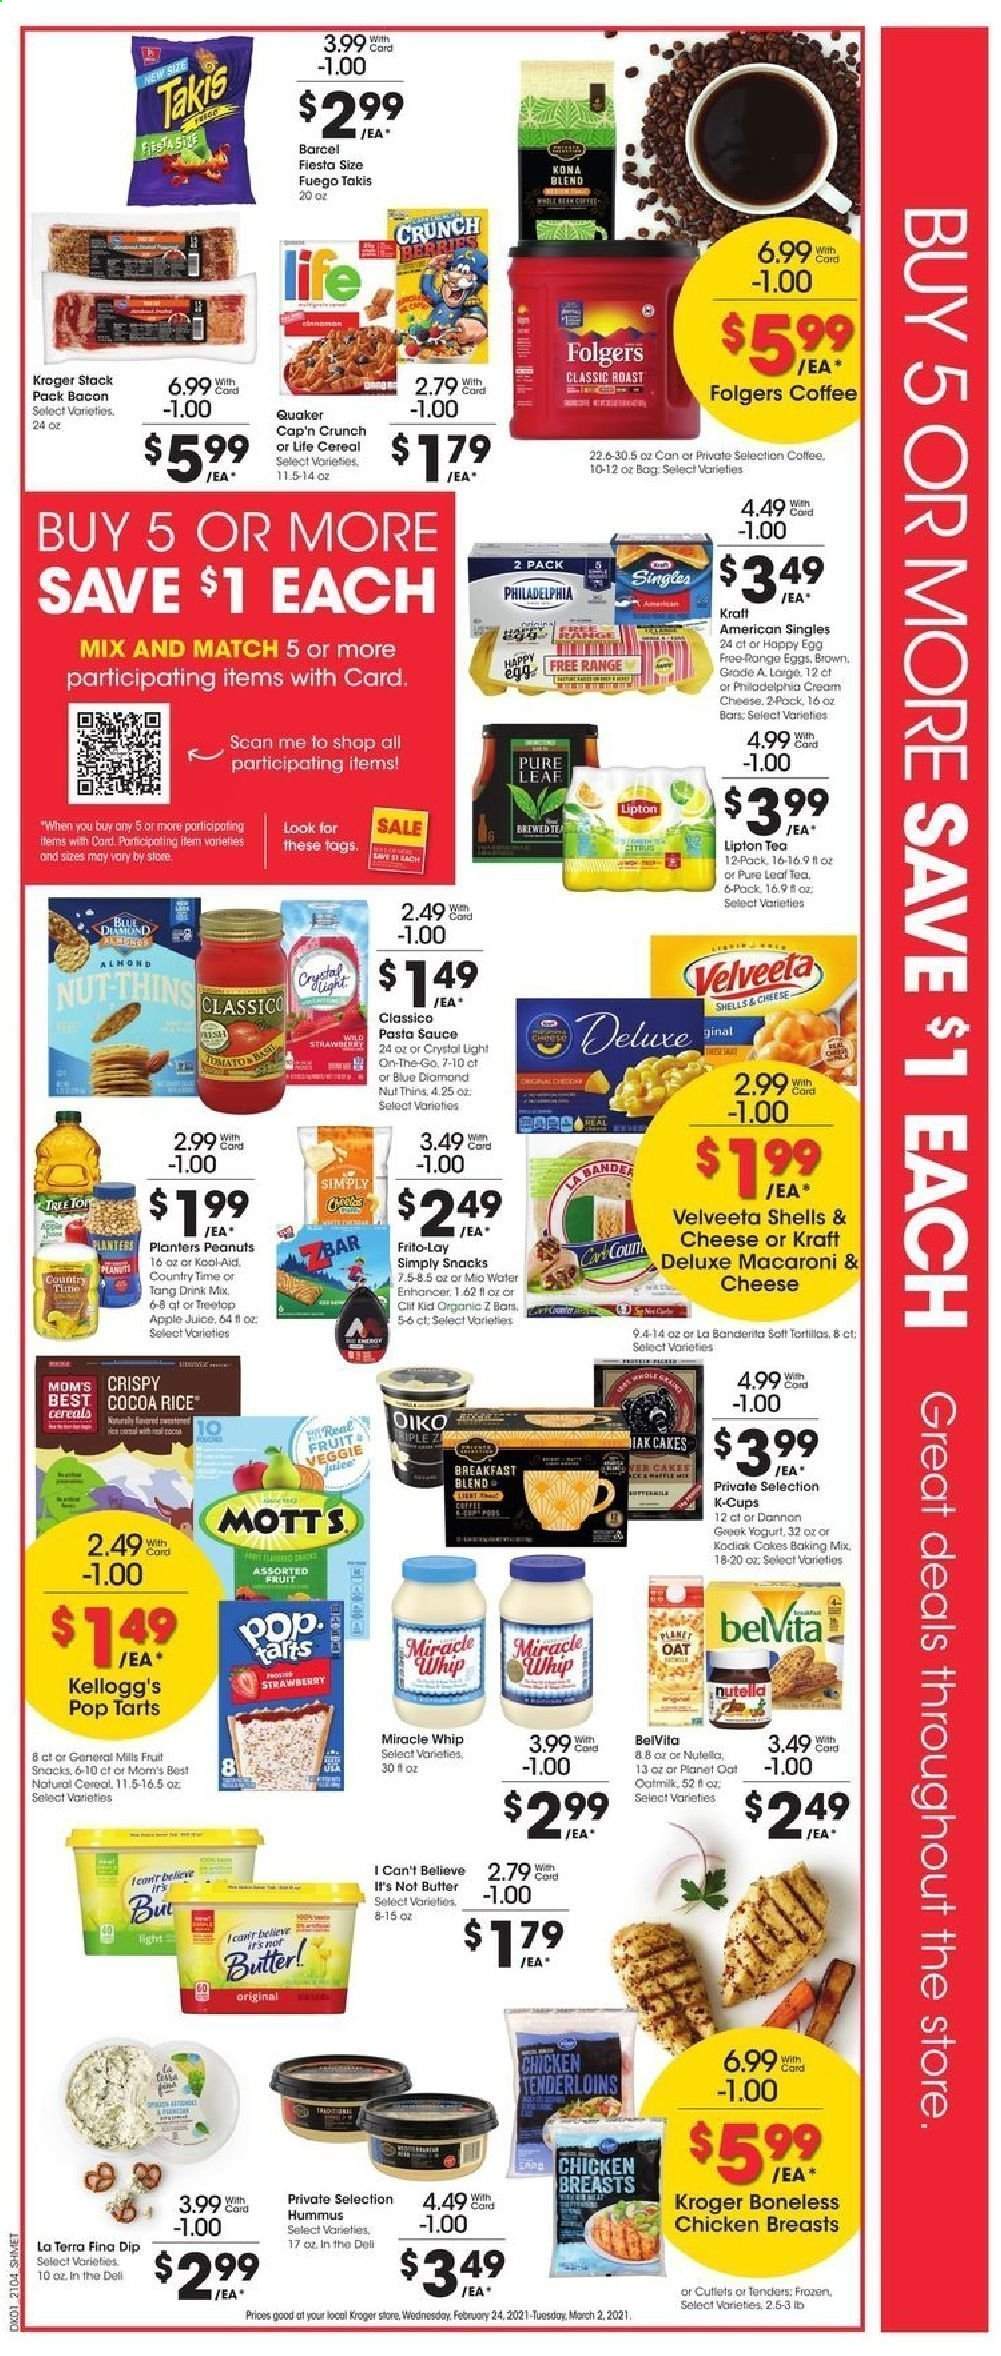 thumbnail - Kroger Flyer - 02/24/2021 - 03/02/2021 - Sales products - Apple, cake, cream cheese, macaroni & cheese, sauce, Quaker, Kraft®, bacon, hummus, Philadelphia, Kraft Singles, yoghurt, Dannon, oat milk, eggs, butter, Miracle Whip, dip, Nutella, Kellogg's, Pop-Tarts, fruit snack, Thins, Frito-Lay, oats, cereals, Cap'n Crunch, belVita, Mom's Best, cocoa rice, pasta sauce, peanuts, Planters, apple juice, juice, Lipton, Mott's, Country Time, tea, Pure Leaf, coffee, Folgers, coffee capsules, K-Cups, breakfast blend, chicken breasts, Cif, cap. Page 2.